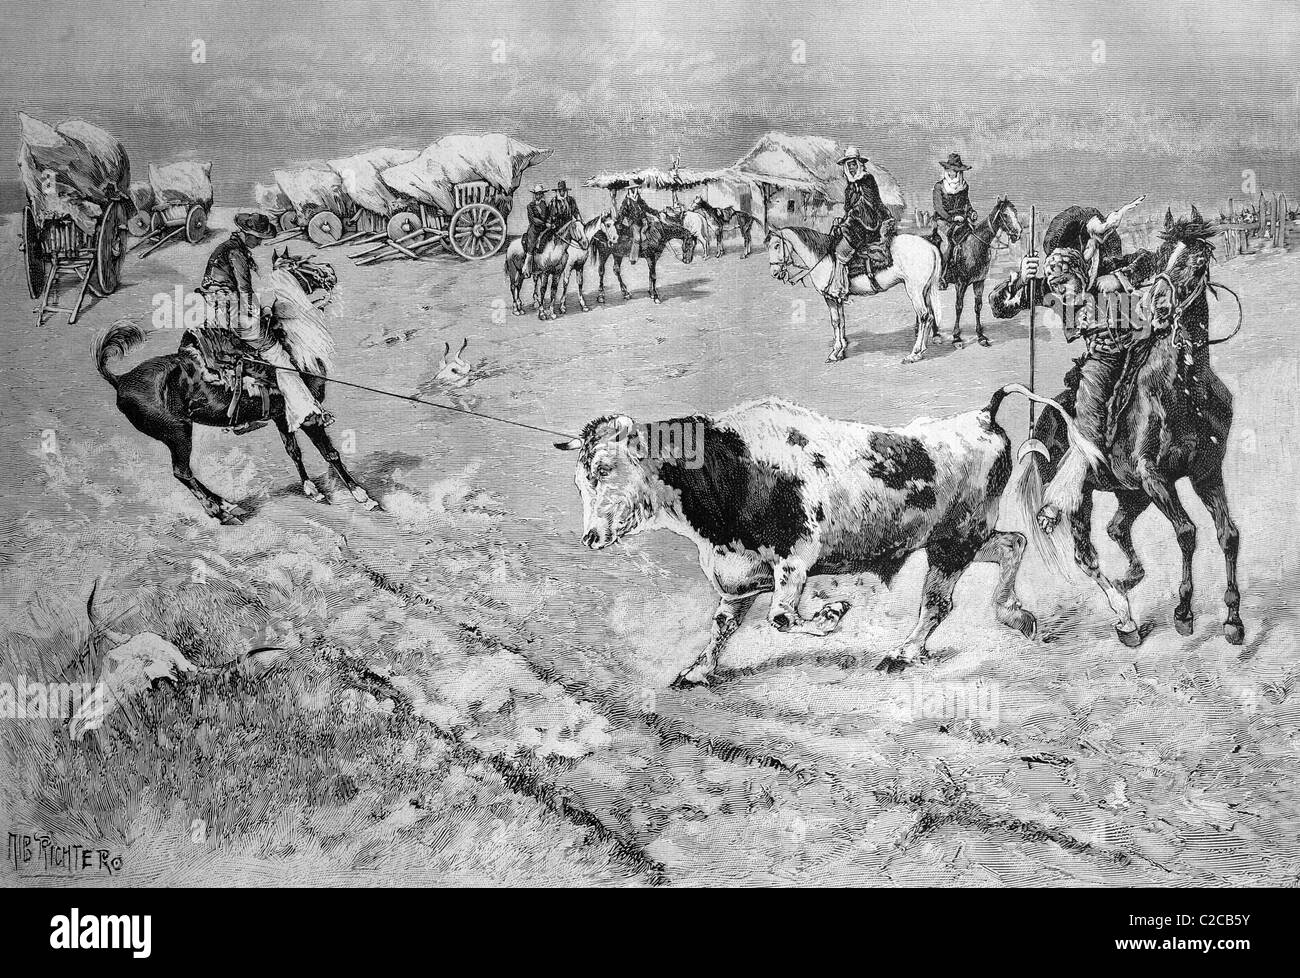 Capturing a bull on the Pampas, historical illustration, ca. 1893 Stock Photo